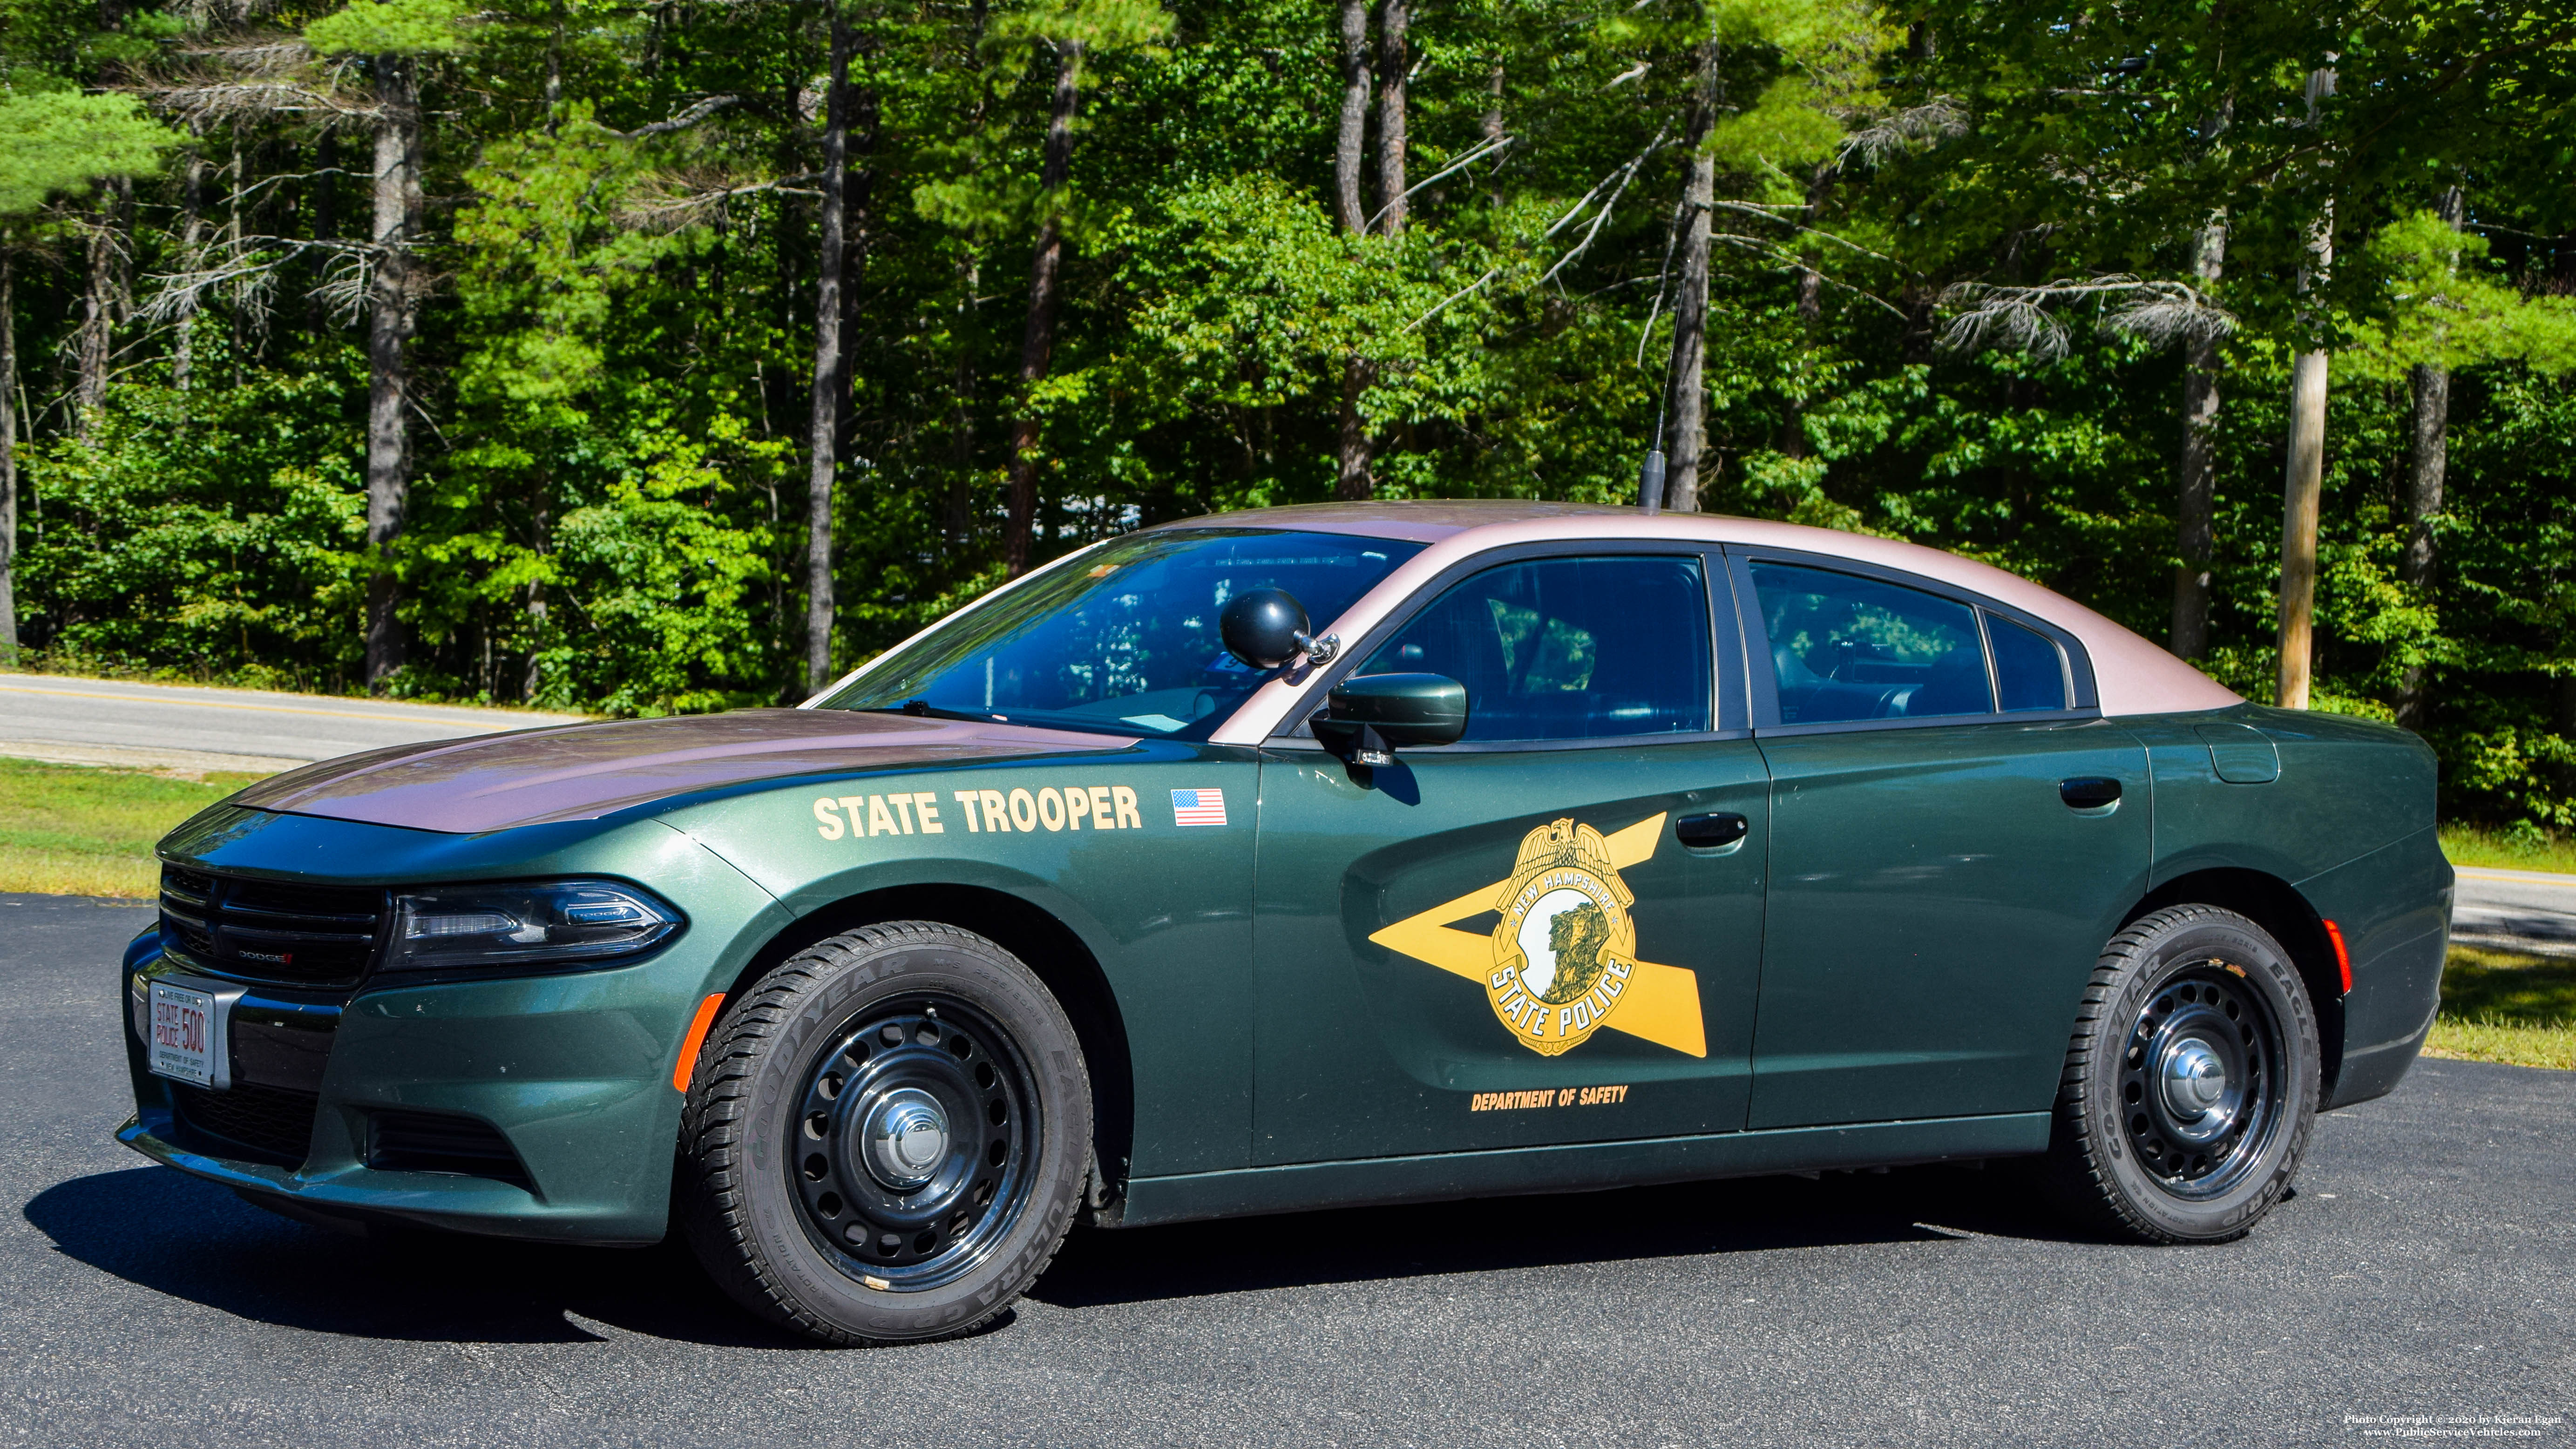 A photo  of New Hampshire State Police
            Cruiser 500, a 2017 Dodge Charger             taken by Kieran Egan